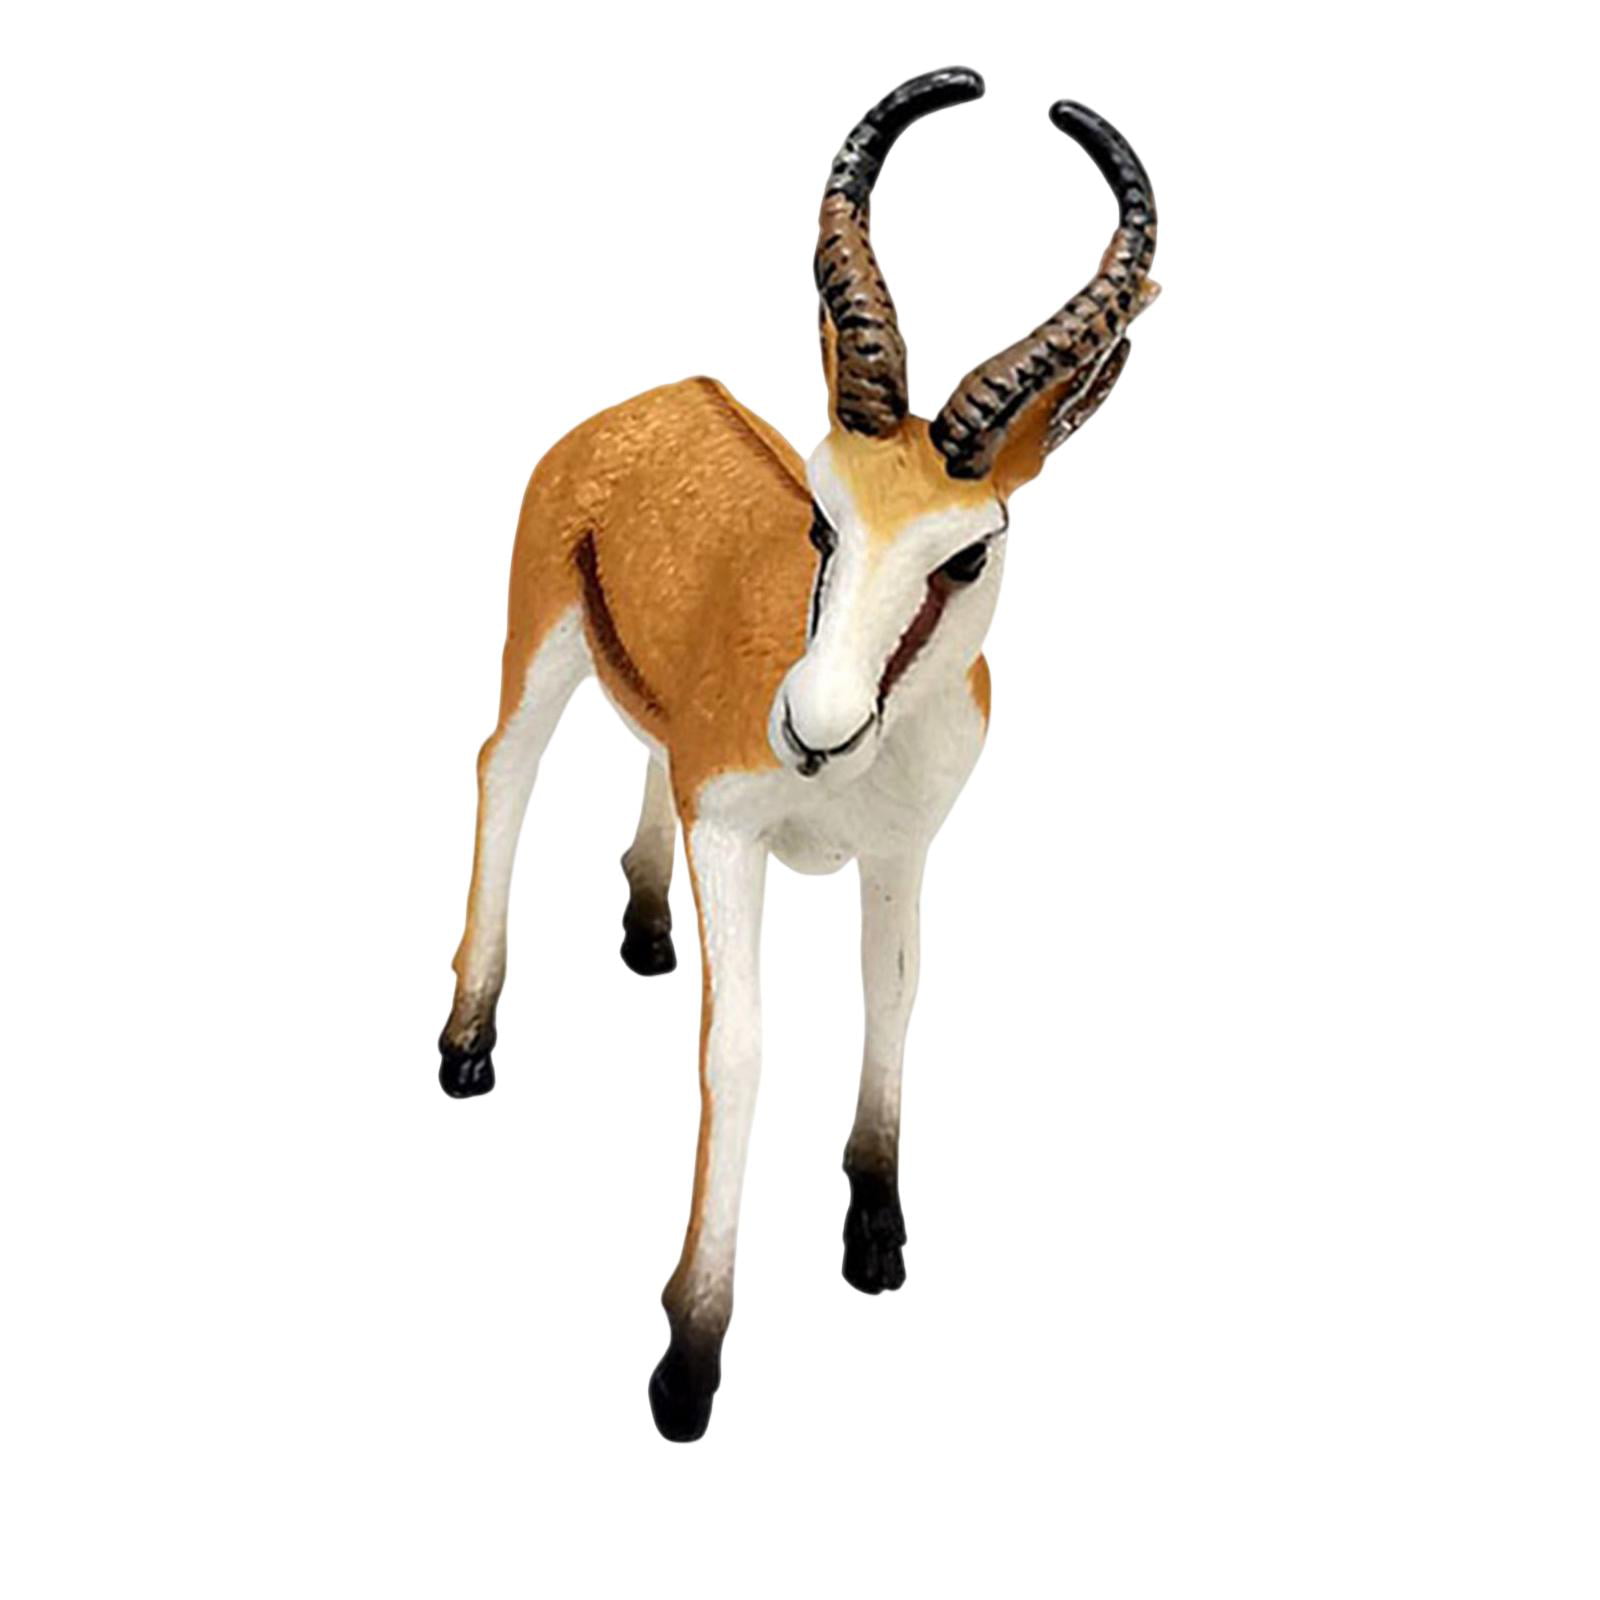 ras krekel relais Antelope Springbok Deer Figurines Learning Preschool Zoo Animal Toy for  Ages 3 and up Kids Collectibles Gifts - Walmart.com